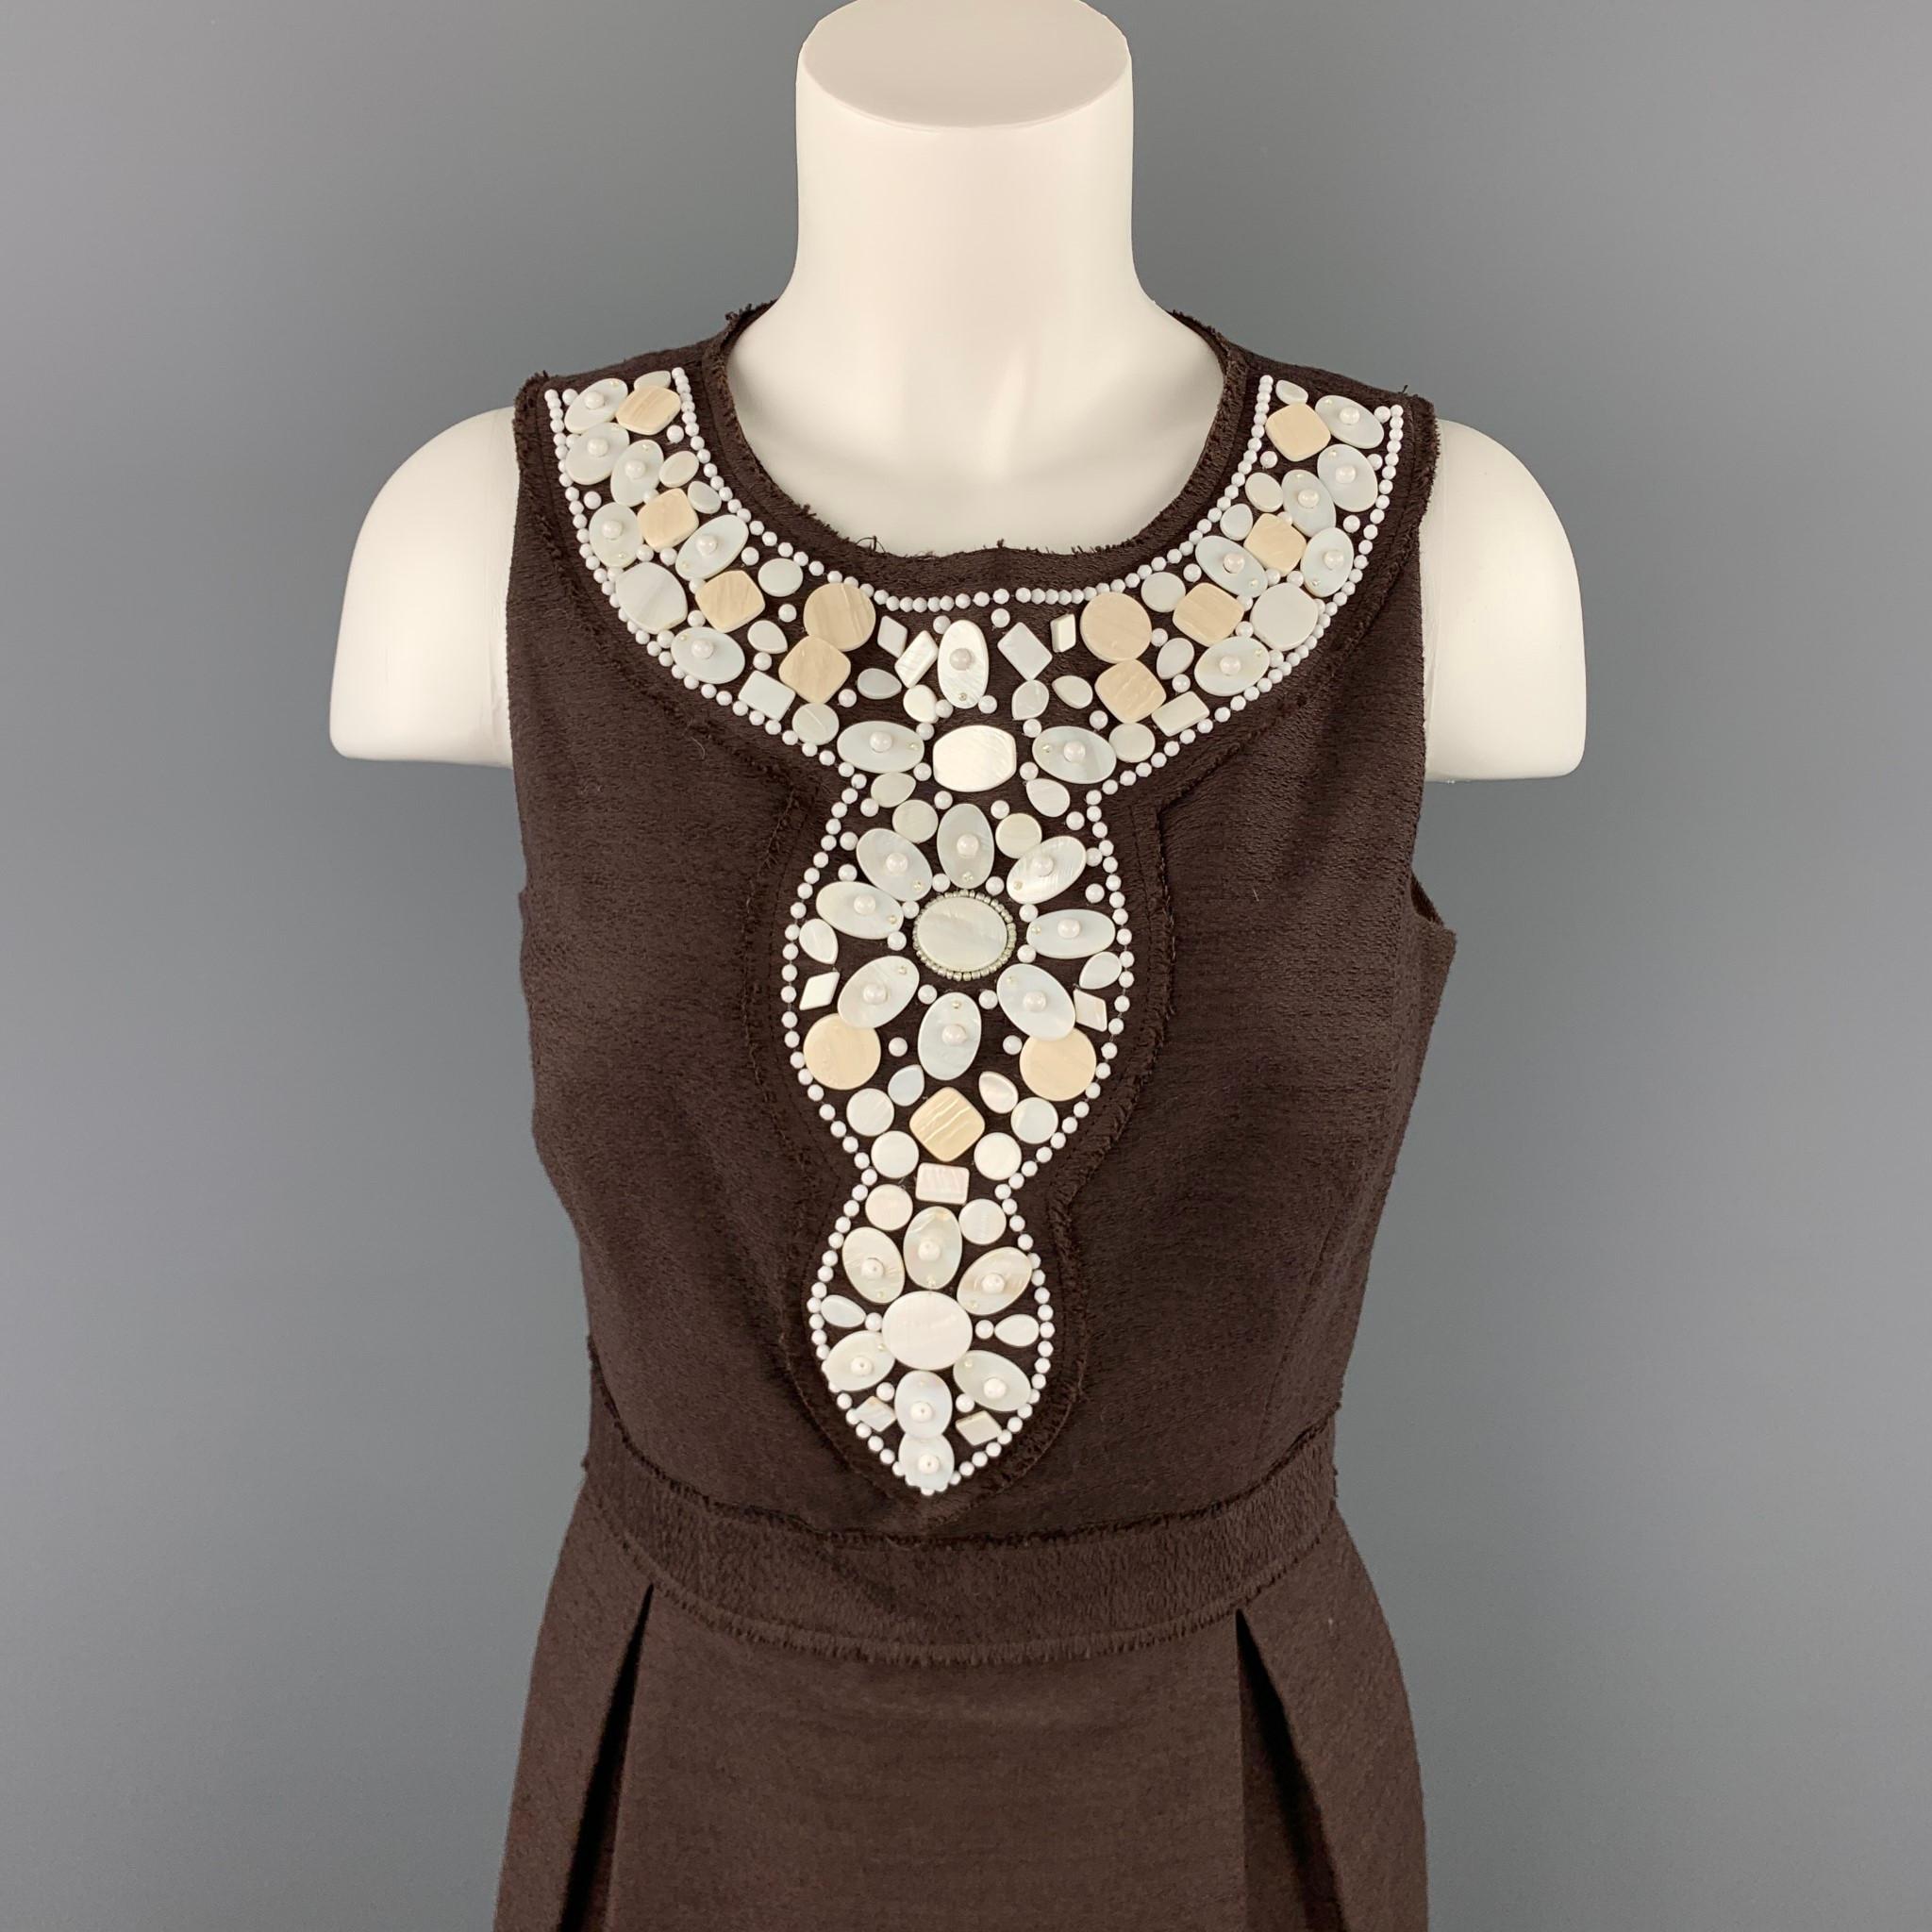 MILLY dress comes in a brown textured polyester / cotton with white beaded details featuring a sheath style, pleated, ad a back zip up closure. Made in USA.

Very Good Pre-Owned Condition.
Marked: 6

Measurements:

Bust: 31 in. 
Waist: 28 in. 
Hip: